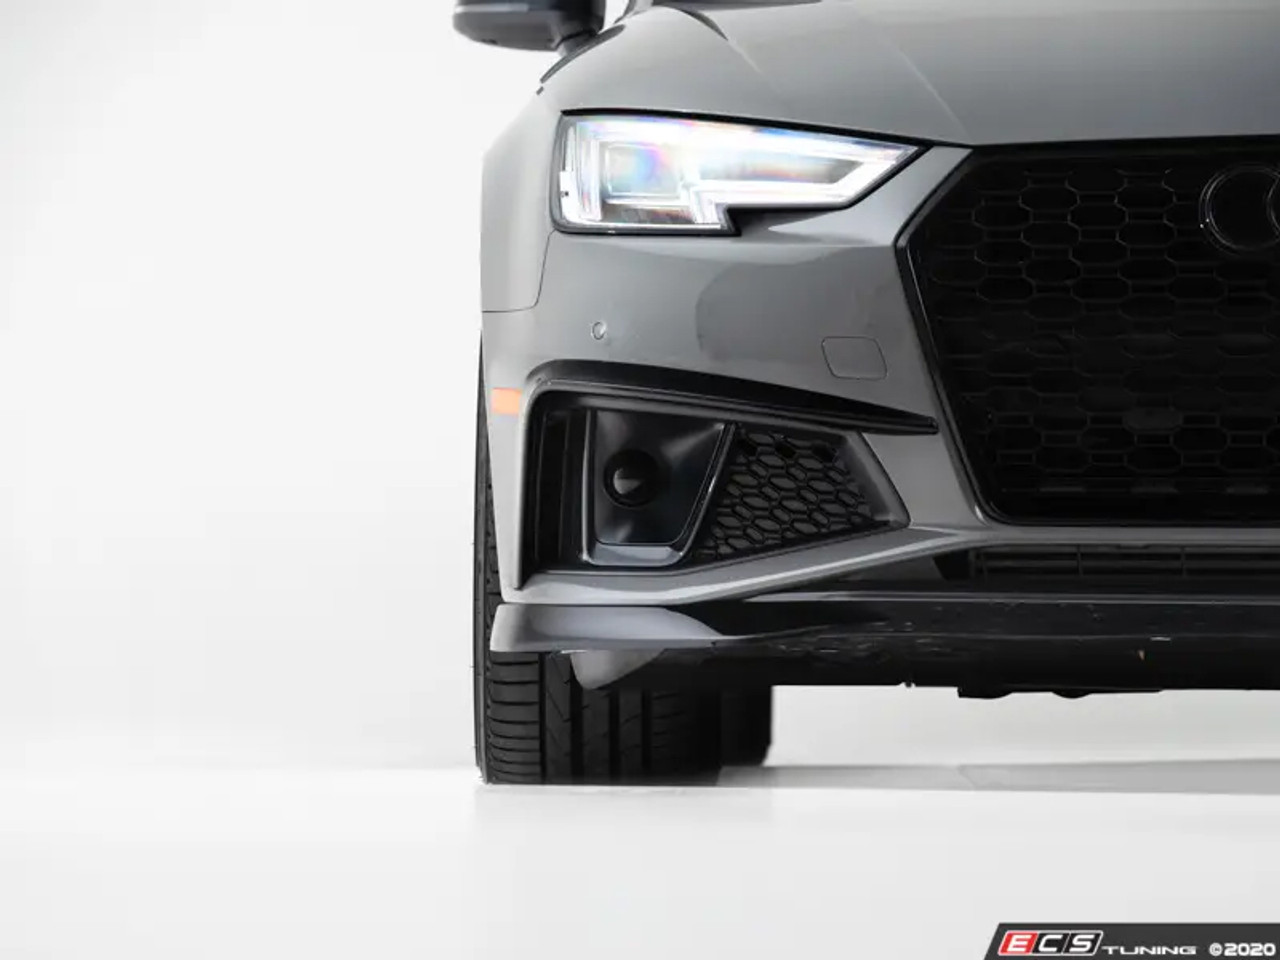 Audi Tuning Specialists - Audi A3, A4, TT, S3, S4, RS4, R8 Tuning